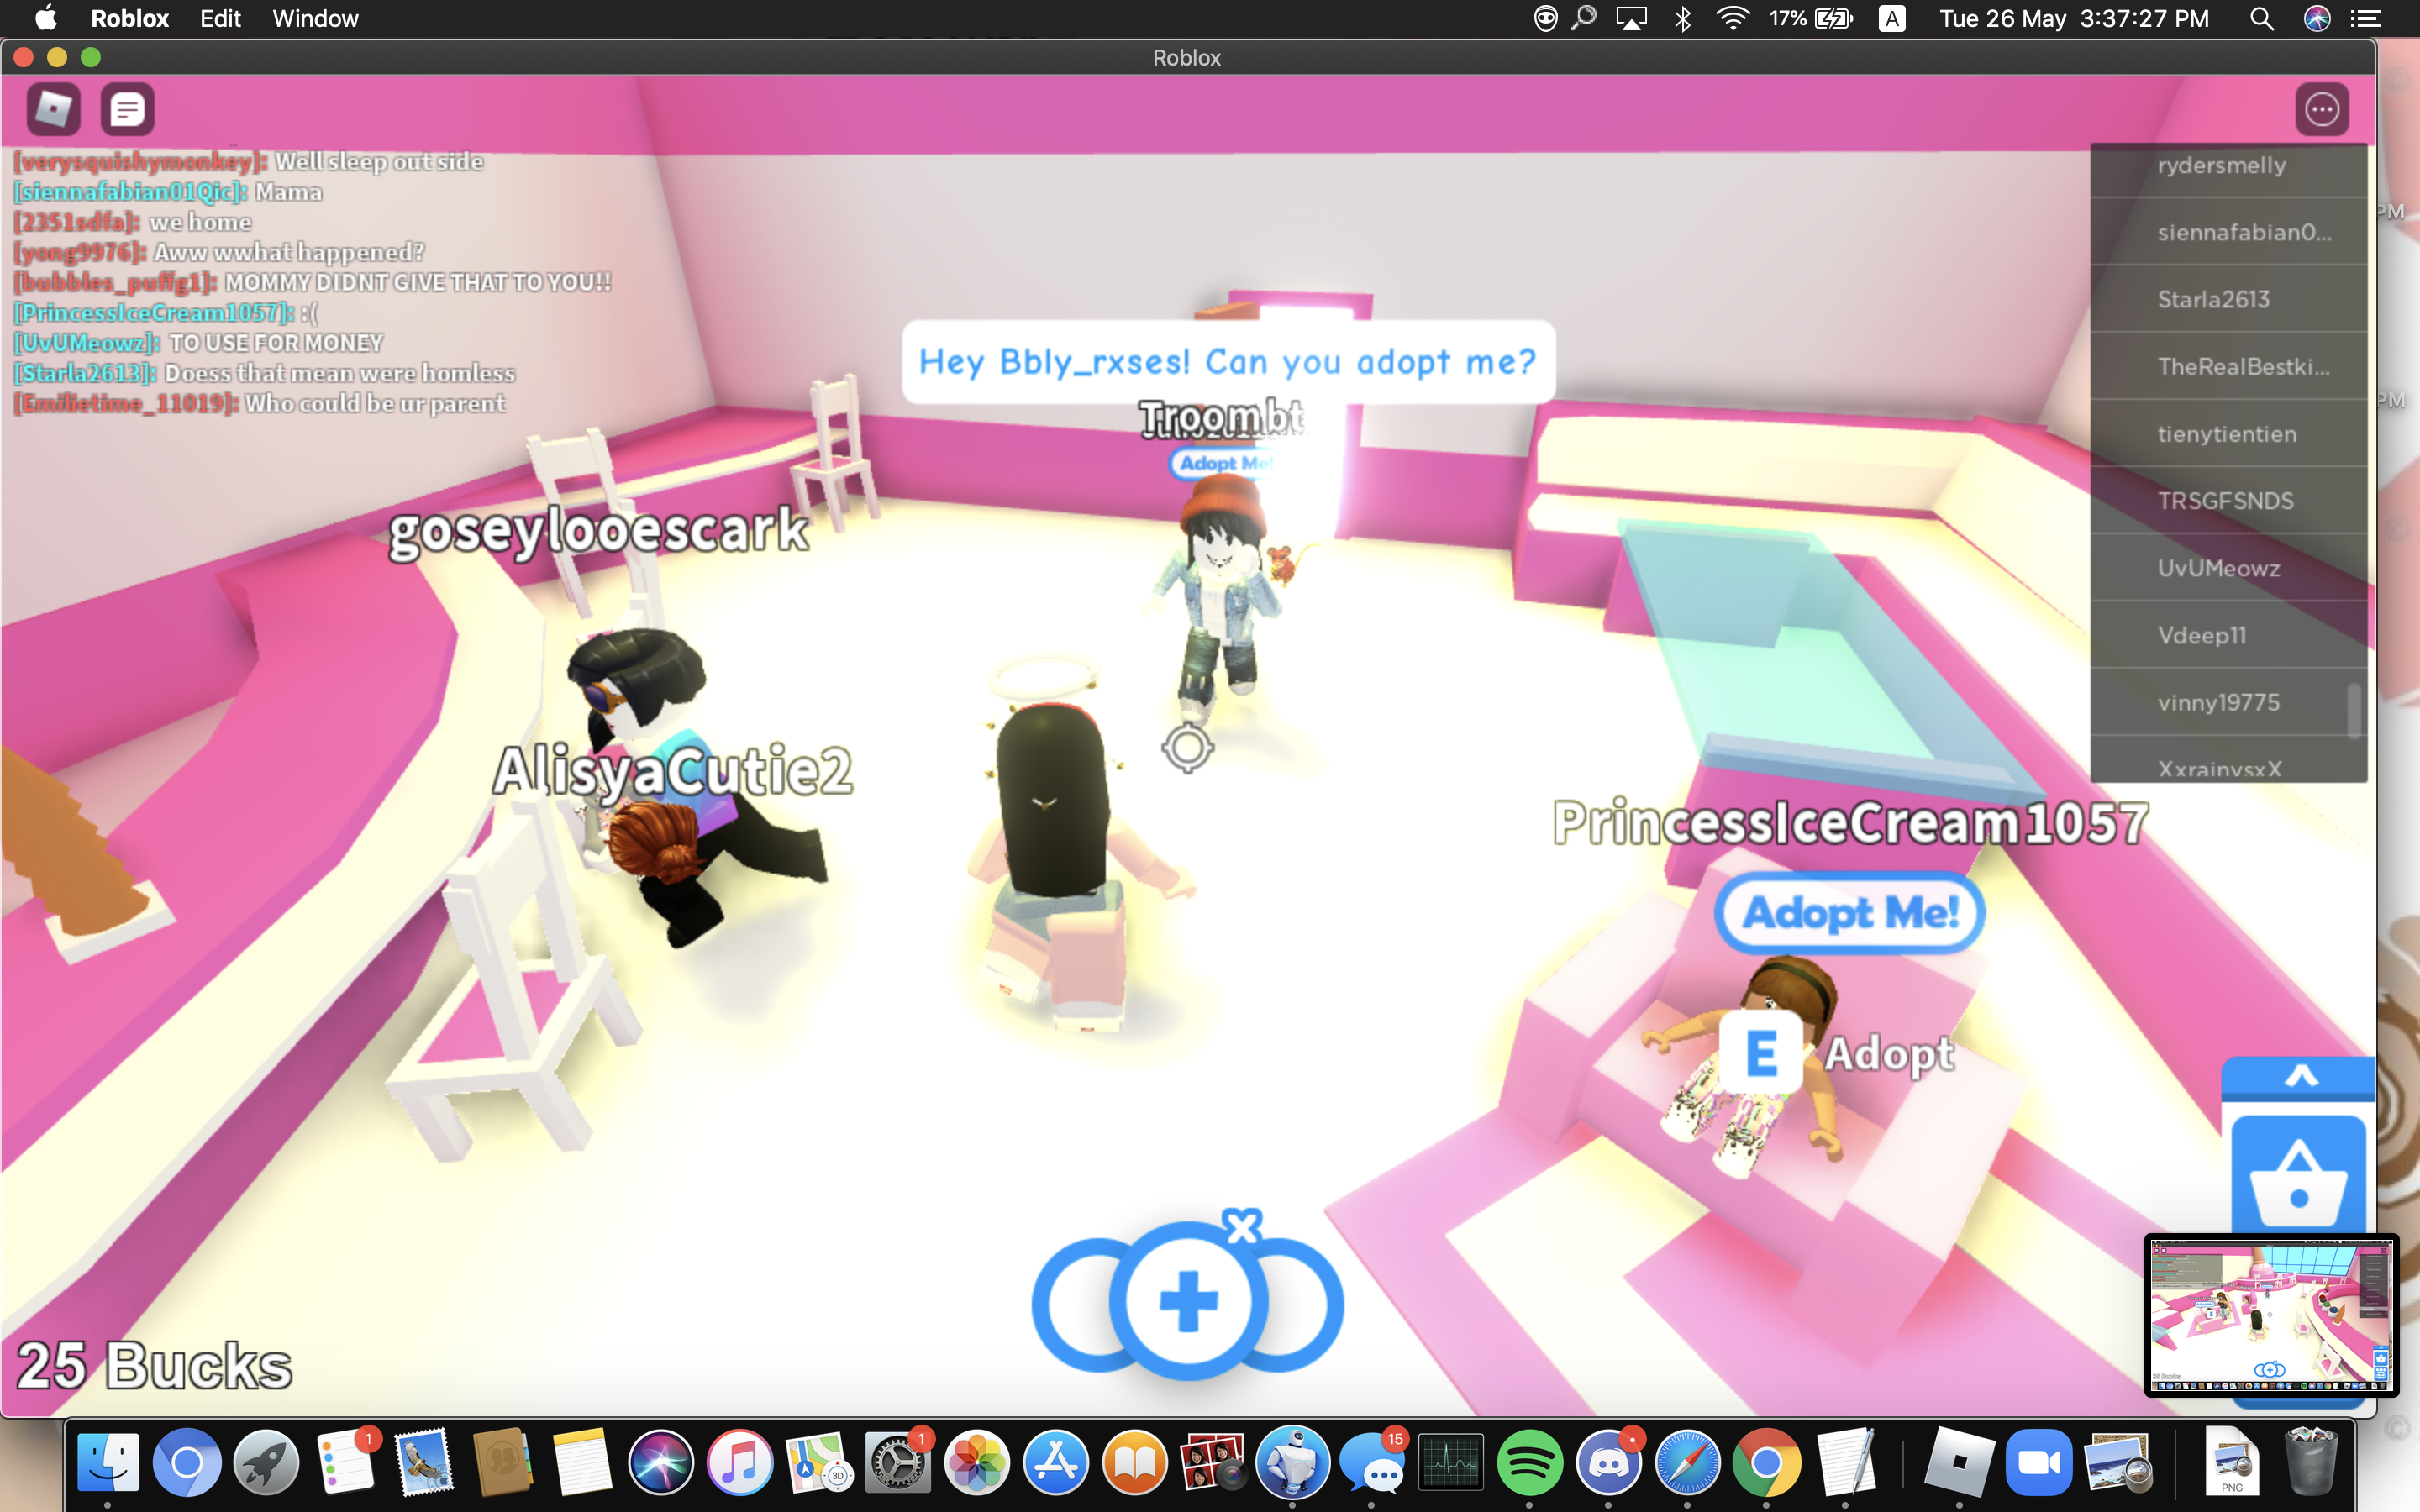 Went And Played Adopt Me Legacy D Link Below Fandom - web.roblox com/support